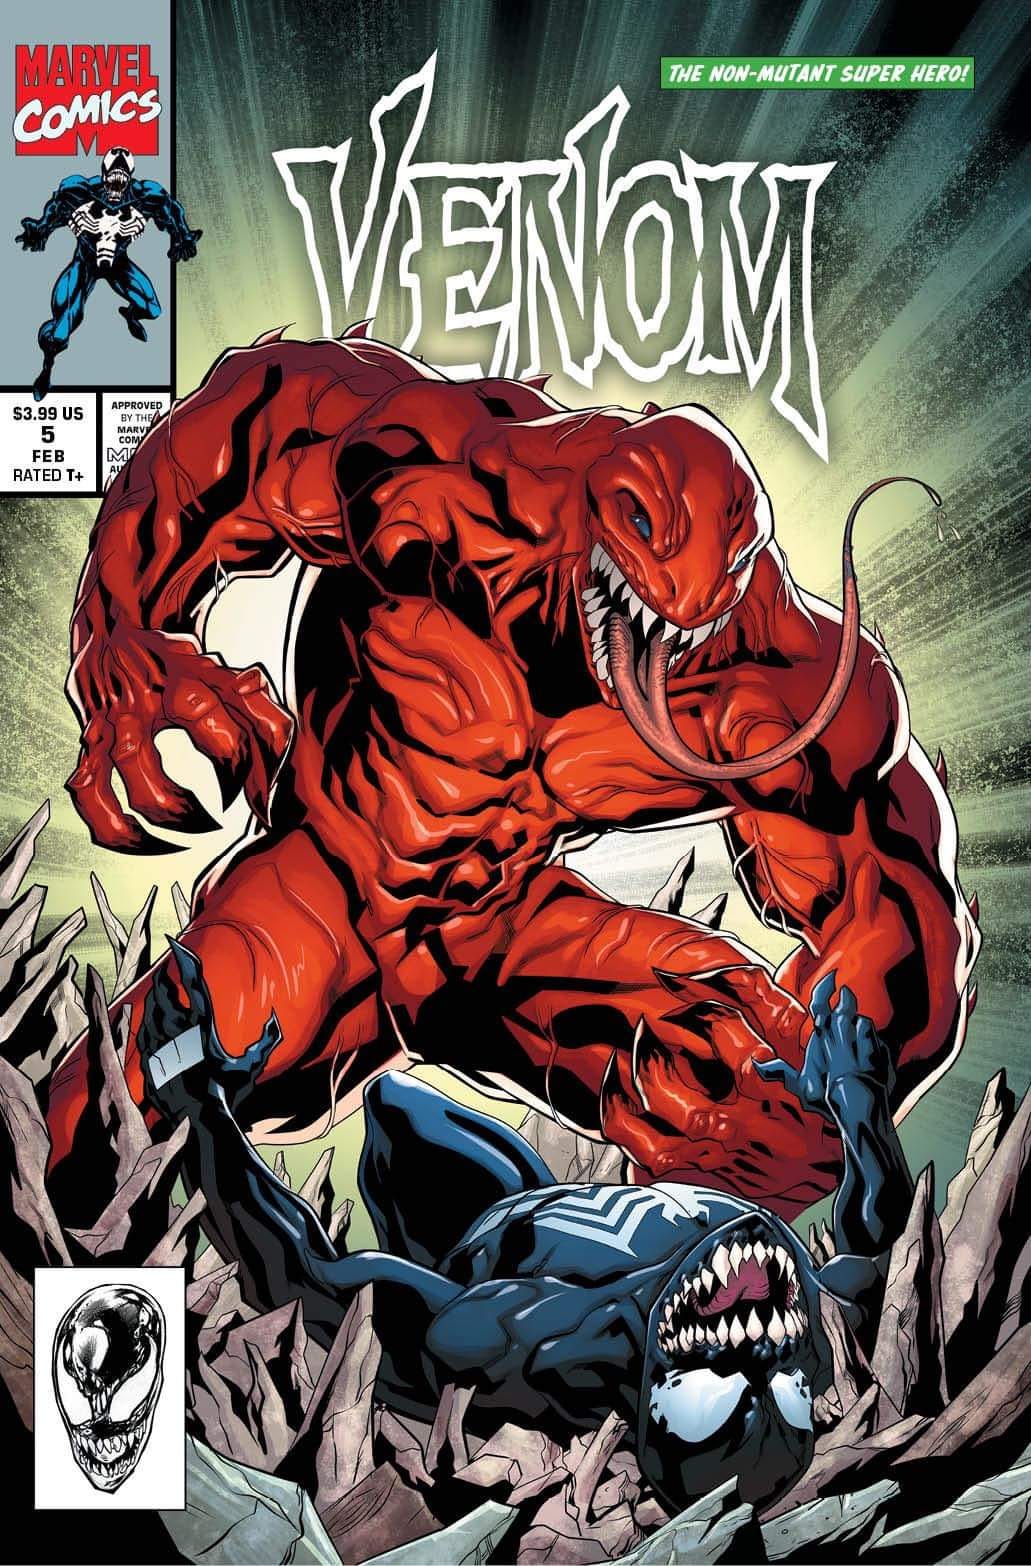 VENOM #5 by WILL SLINEY LIMITED VARIANT - ASM 316 HOMAGE & 1ST COVER APPEARANCE!